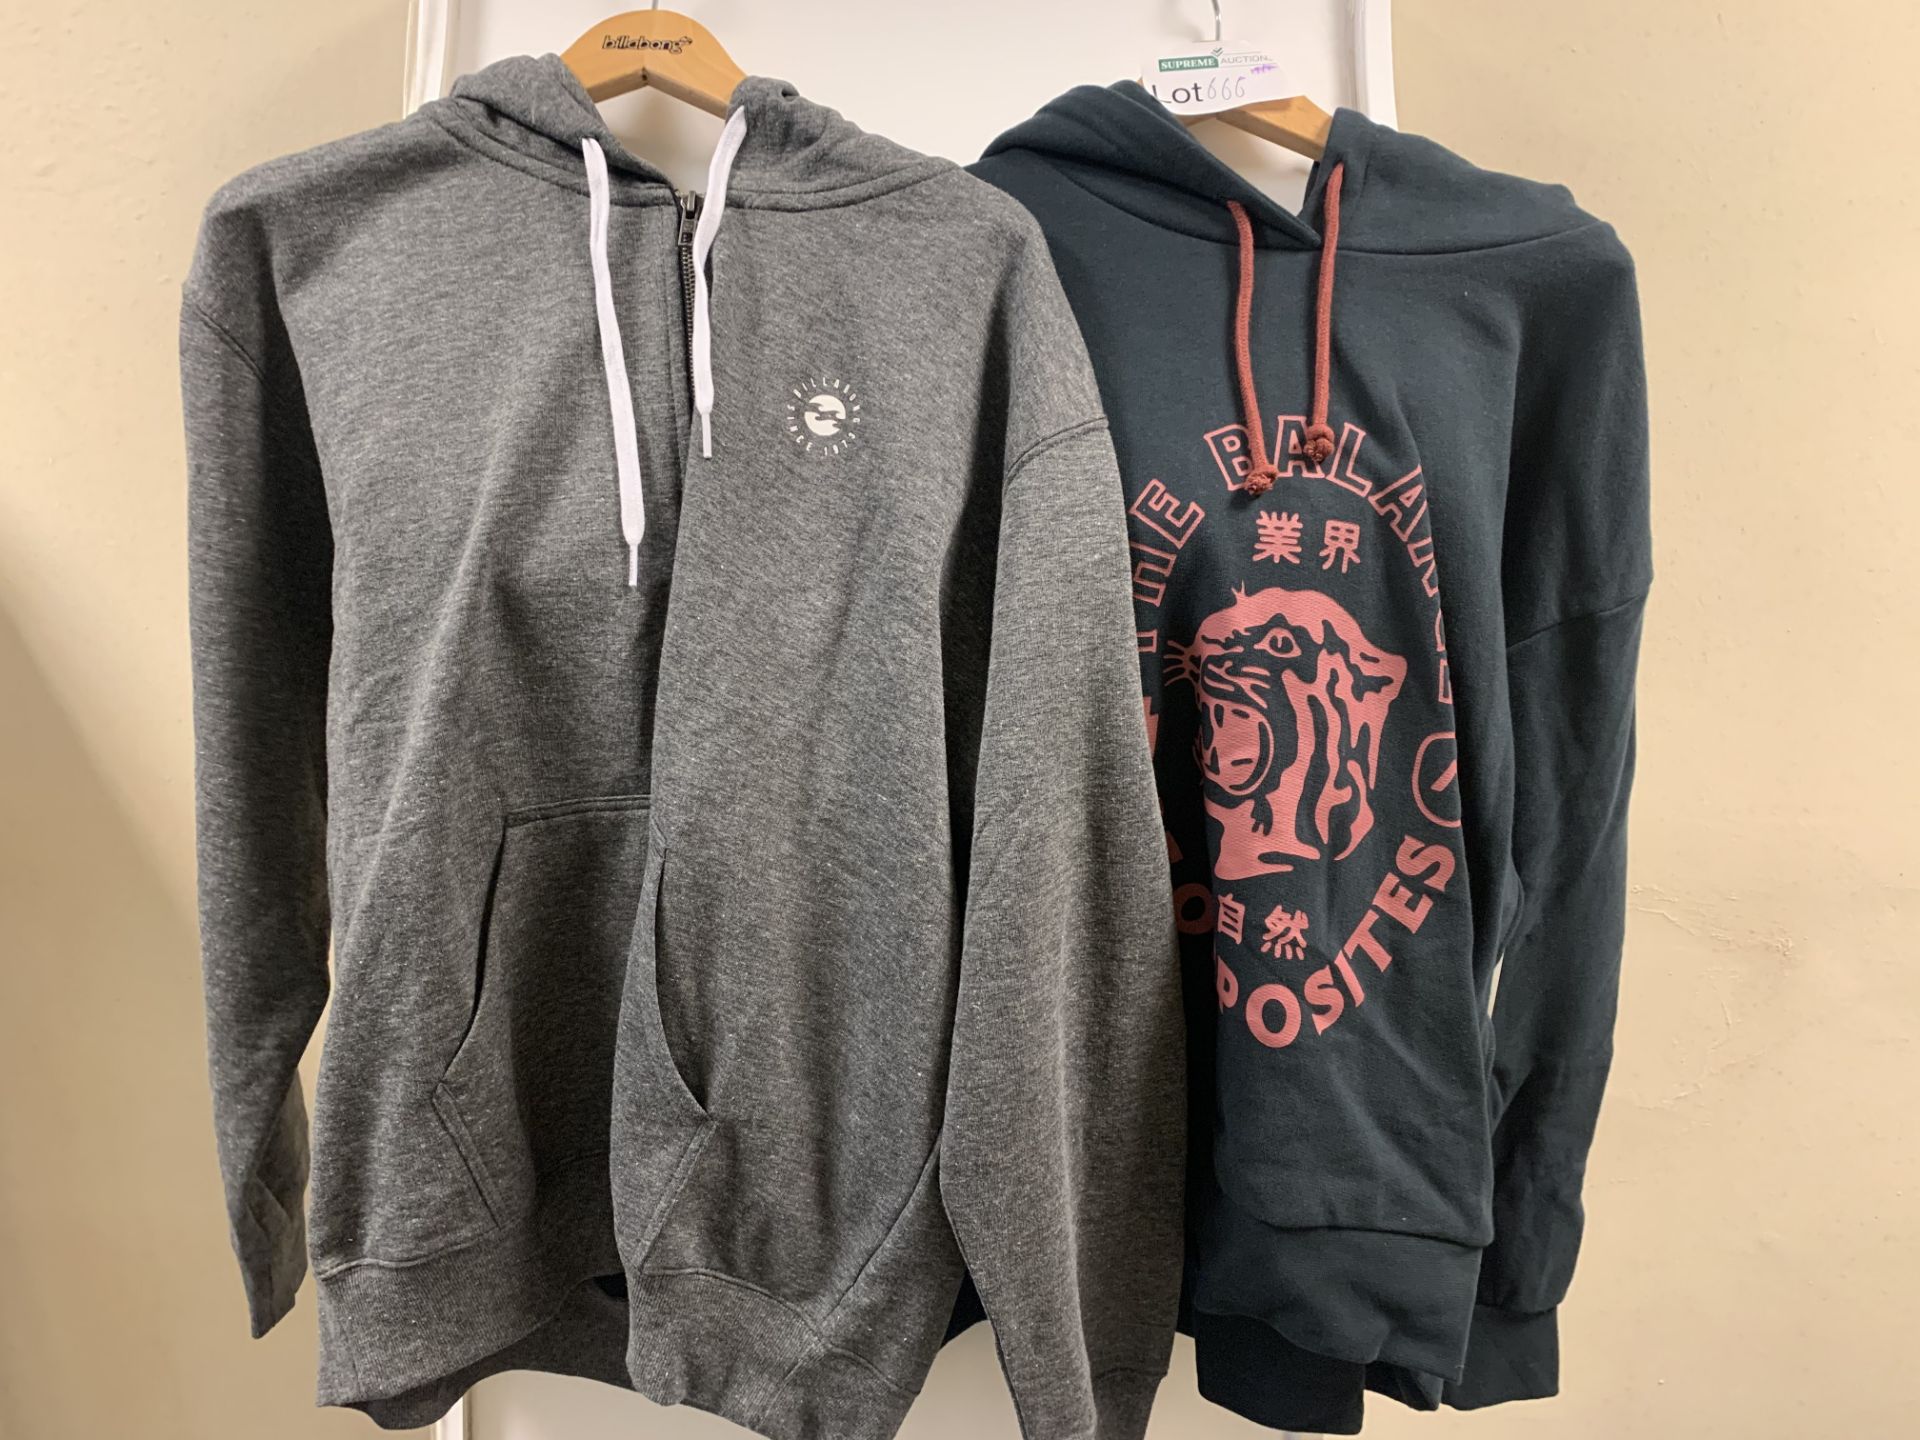 6 X VARIOUS BRAND NEW RVCA AND BILLABONG HOODED TOPS RRP £55 EACH